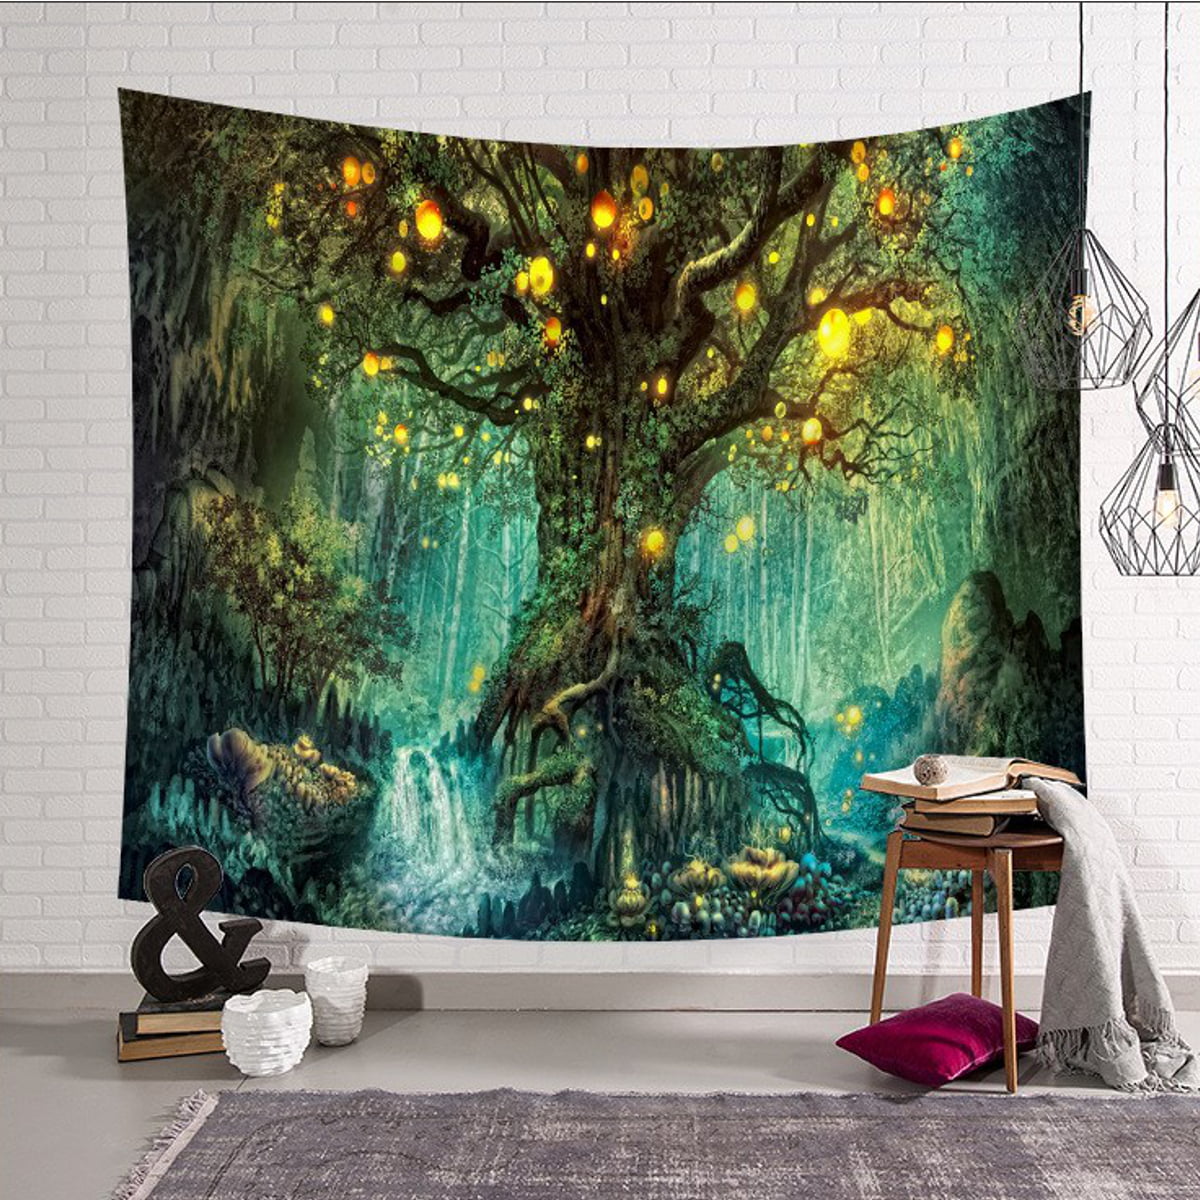 Flower Oil Painting Tapestry Aesthetic Tapestry Wall Hanging Home Decor Garden Painting Tapestry Nature Tapestry Sweet Home Tapestry Art